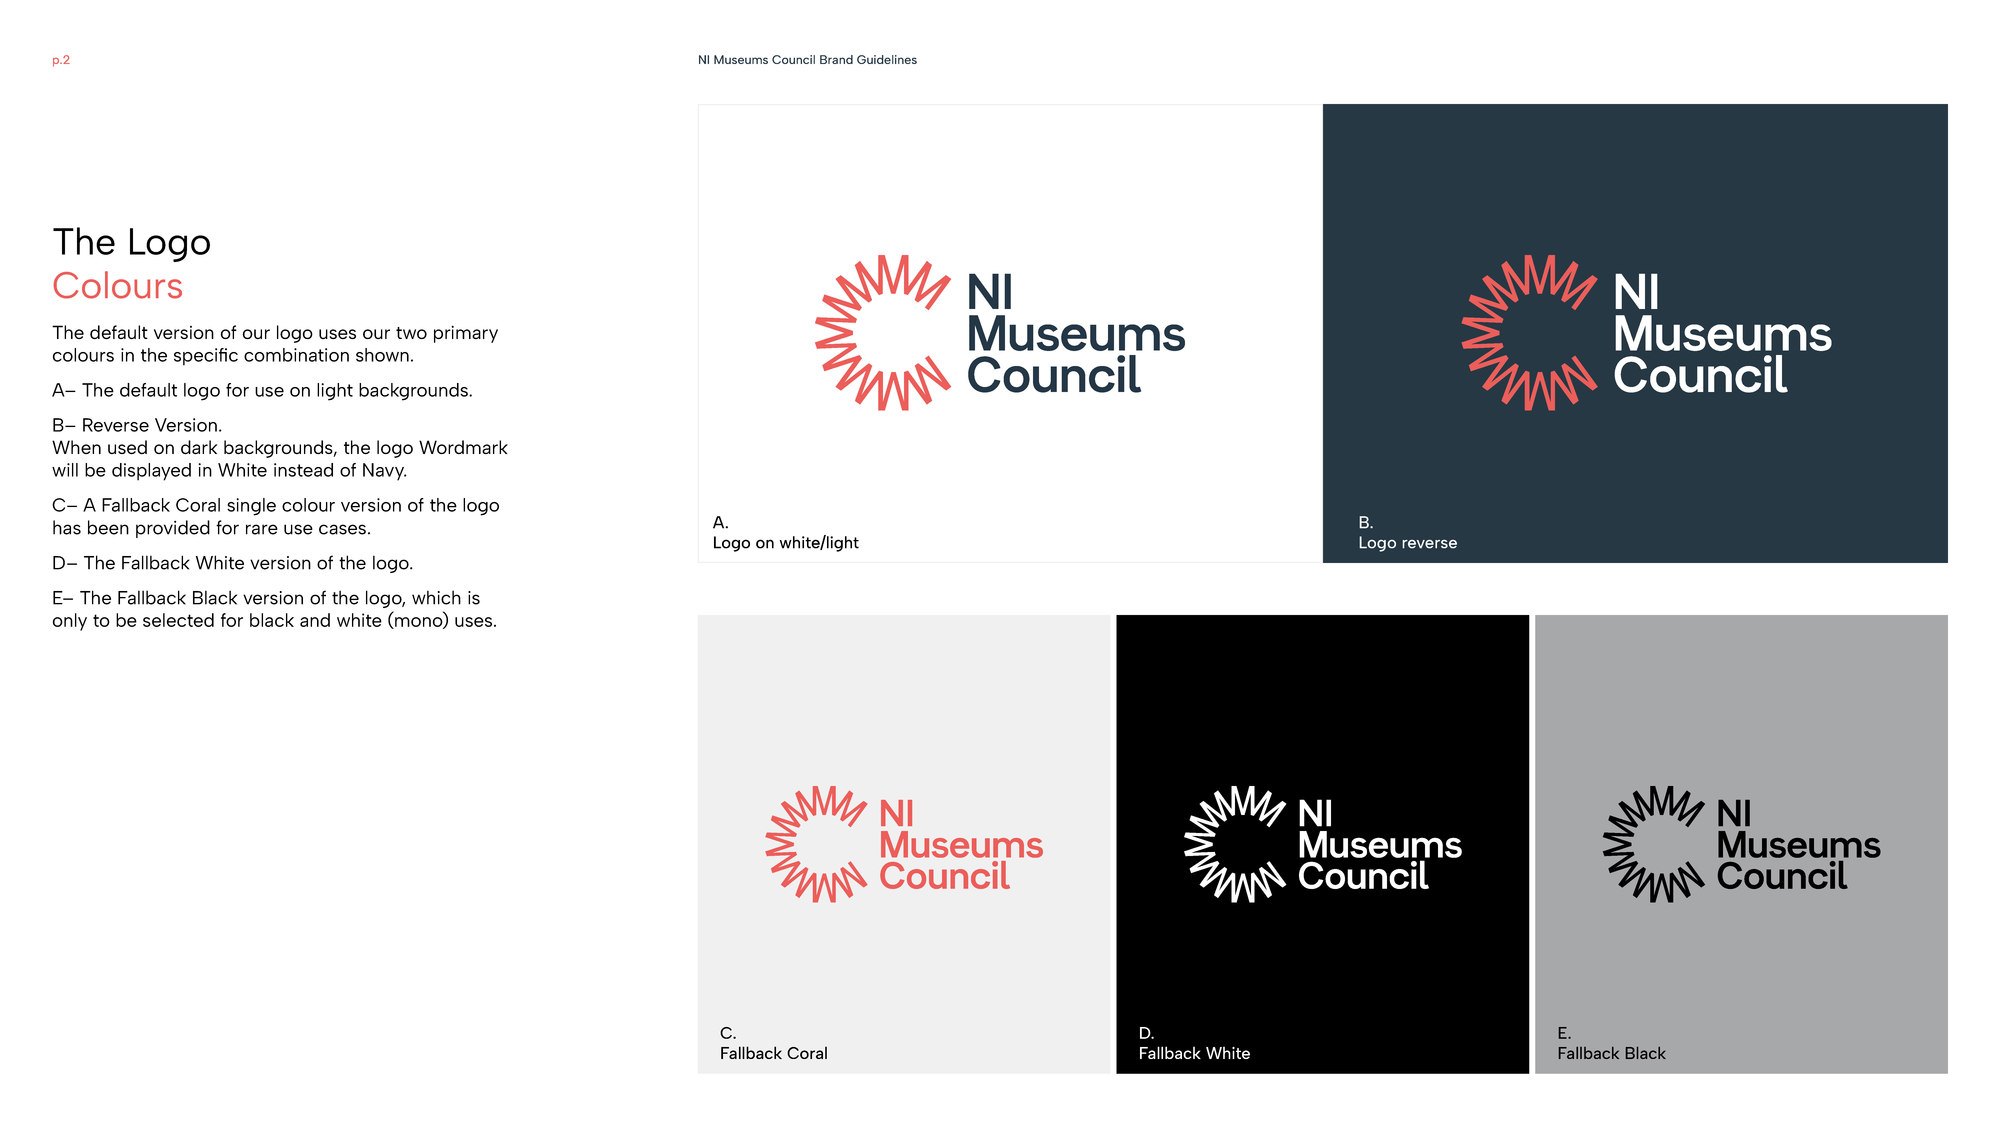 A page from NIMC brand guidelines showing logo styles